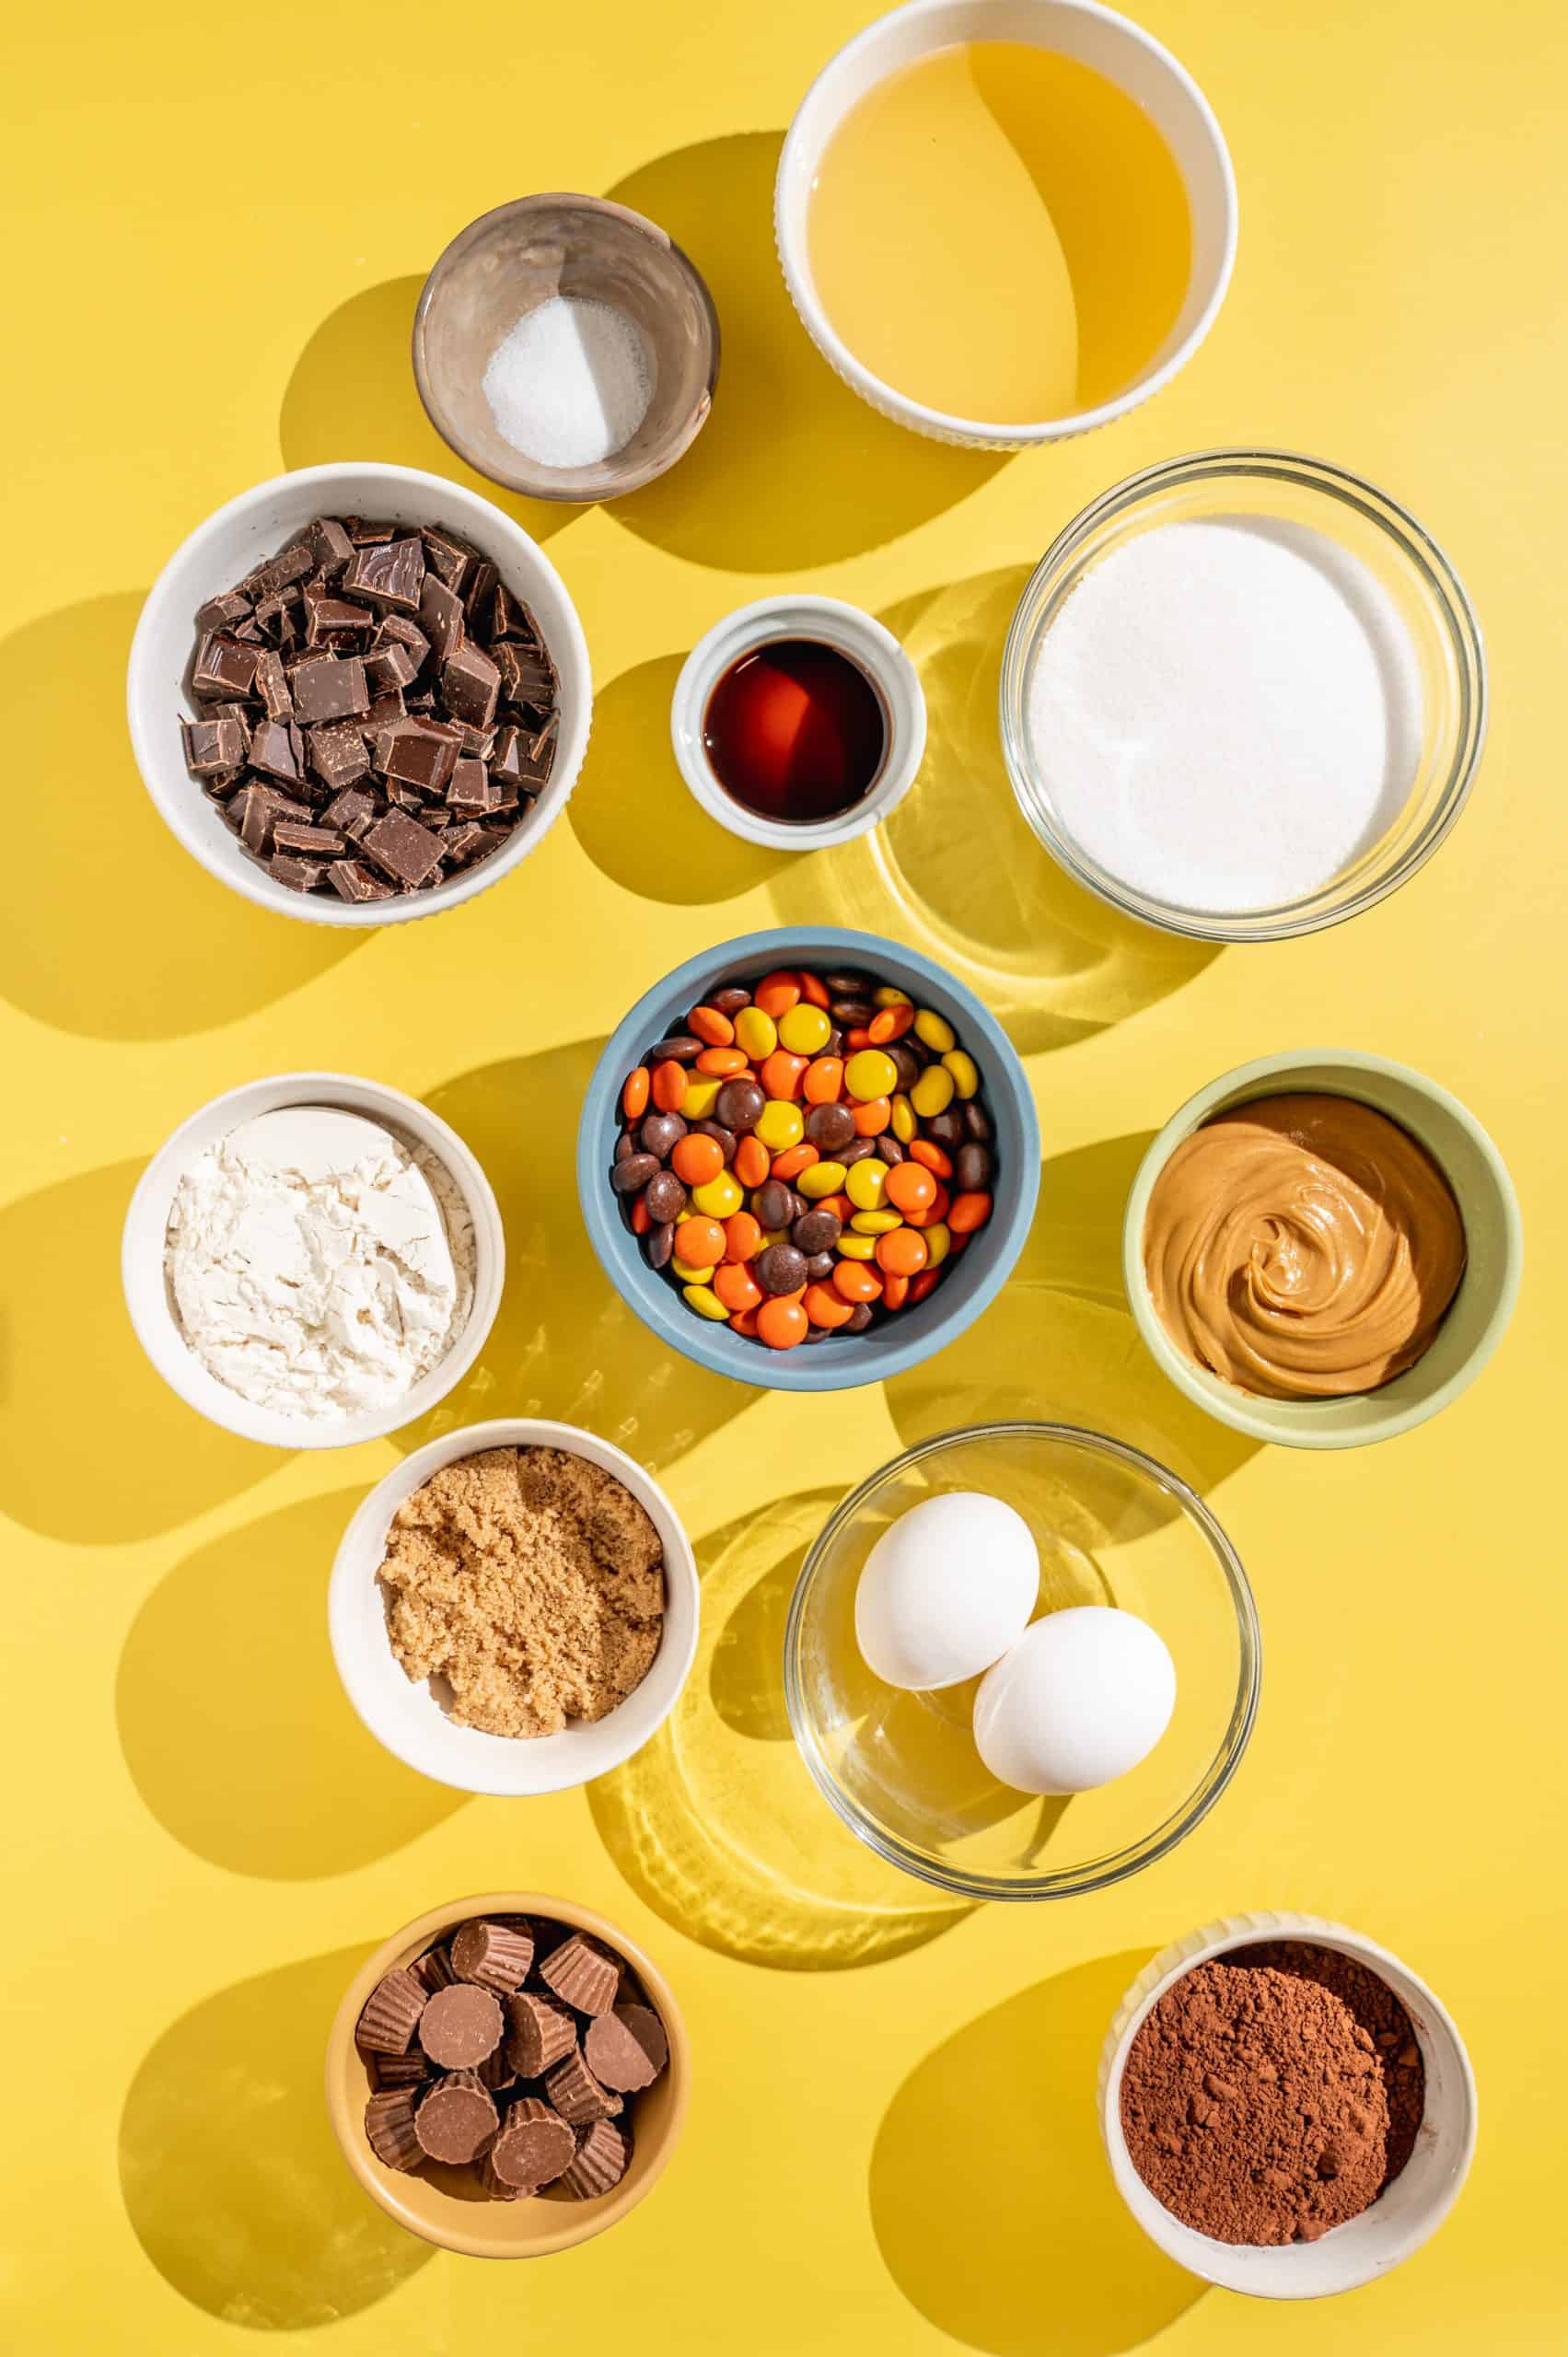 Ingredients to make Reeses pieces brownies: chocolate, oil, sugar, eggs, candy, cocoa, flour, vanilla, and salt.